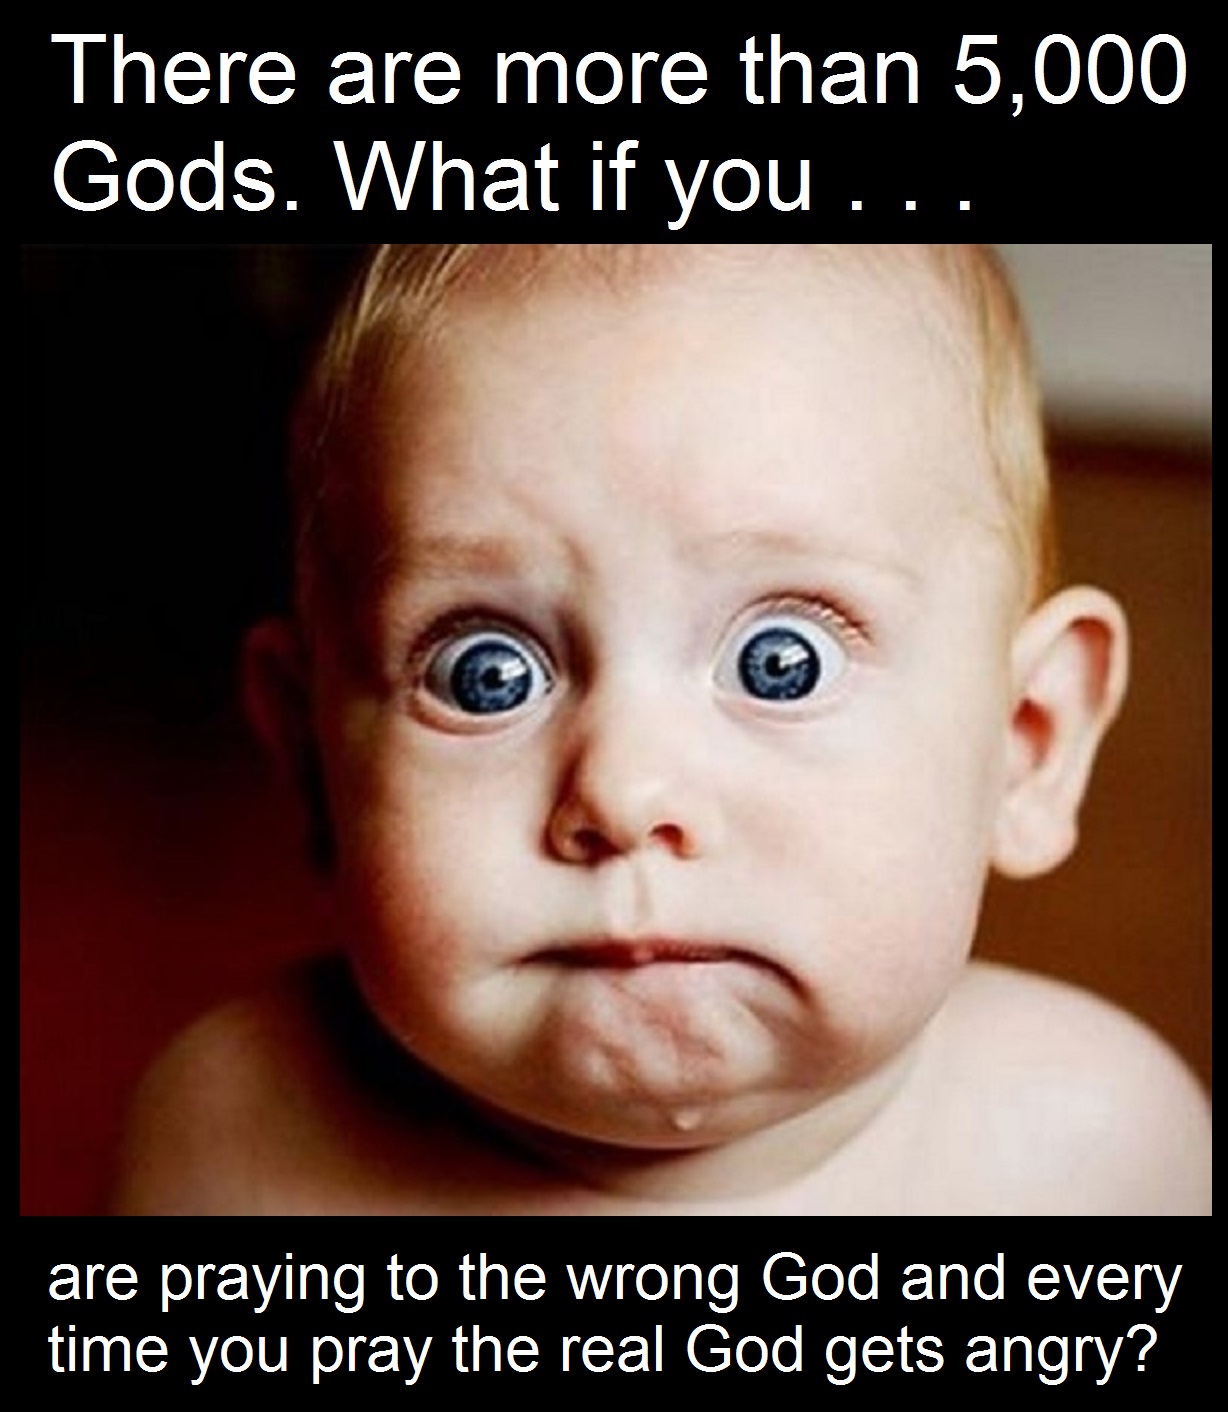 are praying to the wrong God and every time you pray the real God gets angry?